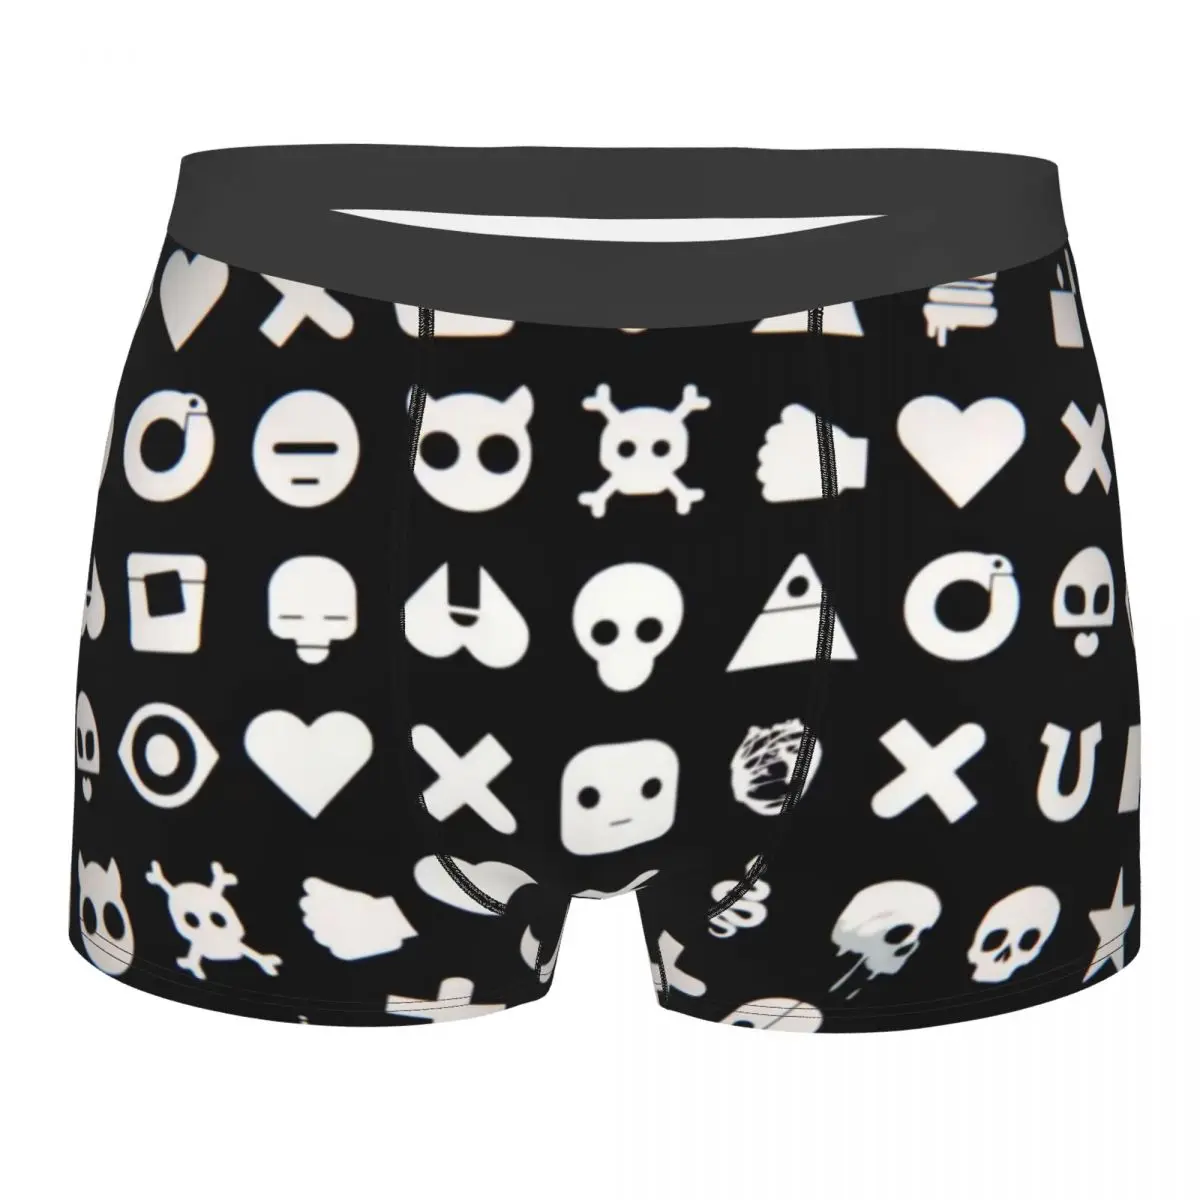 

Sign Men Boxer Briefs Underpants Love Death Robots Dicko Fantasy Drama Highly Breathable Top Quality Sexy Shorts Gift Idea